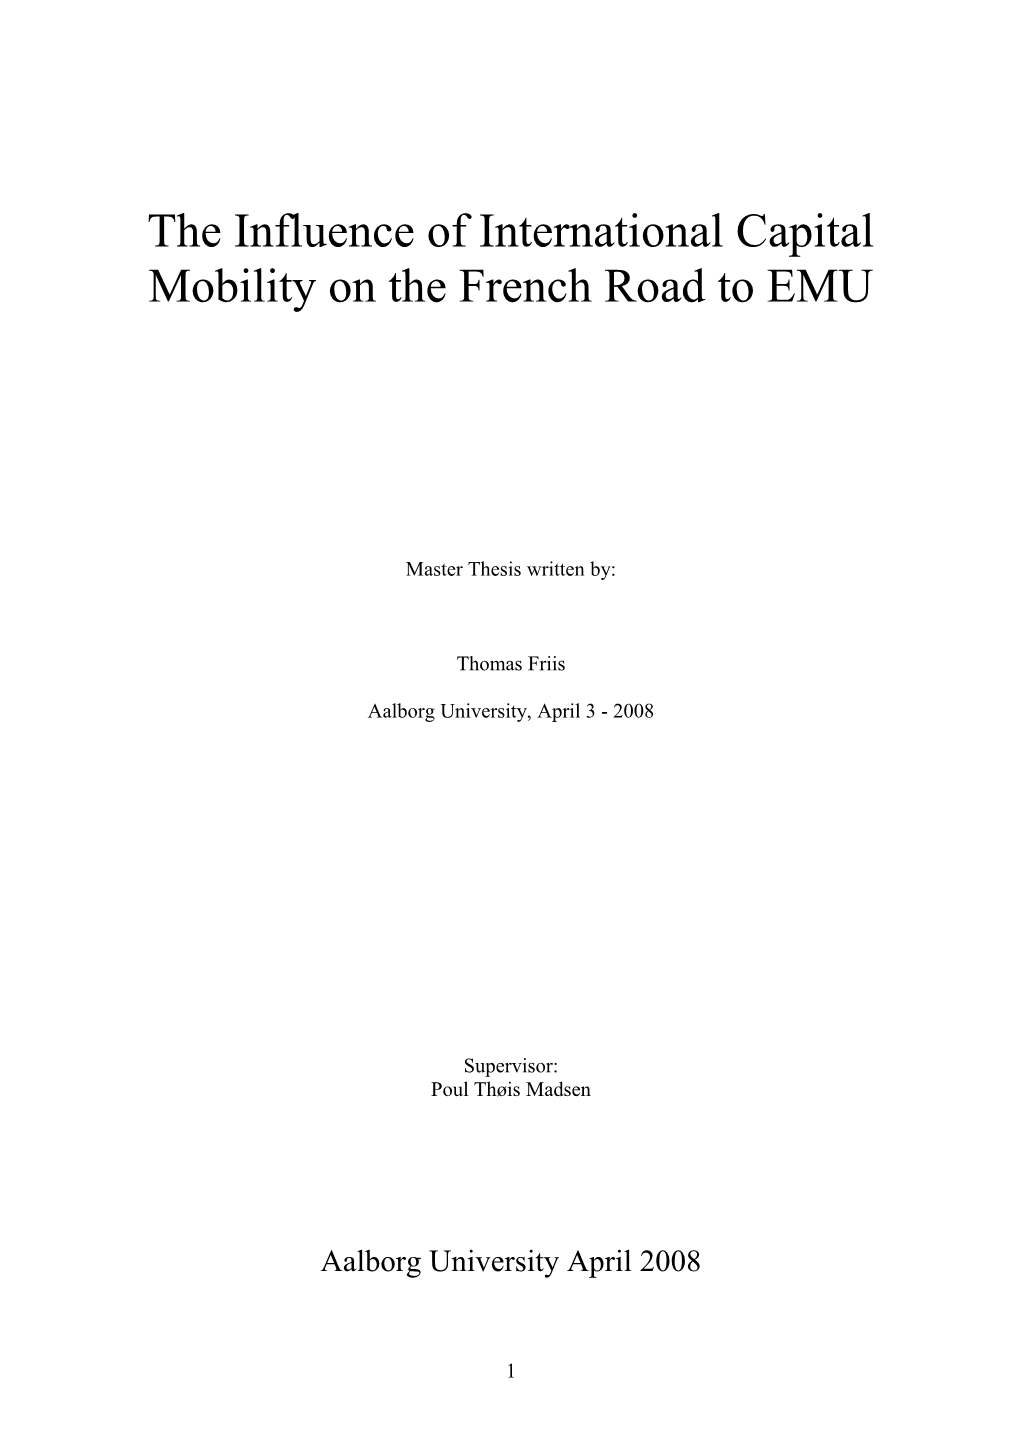 The Influence of International Capital Mobility on the French Road to EMU